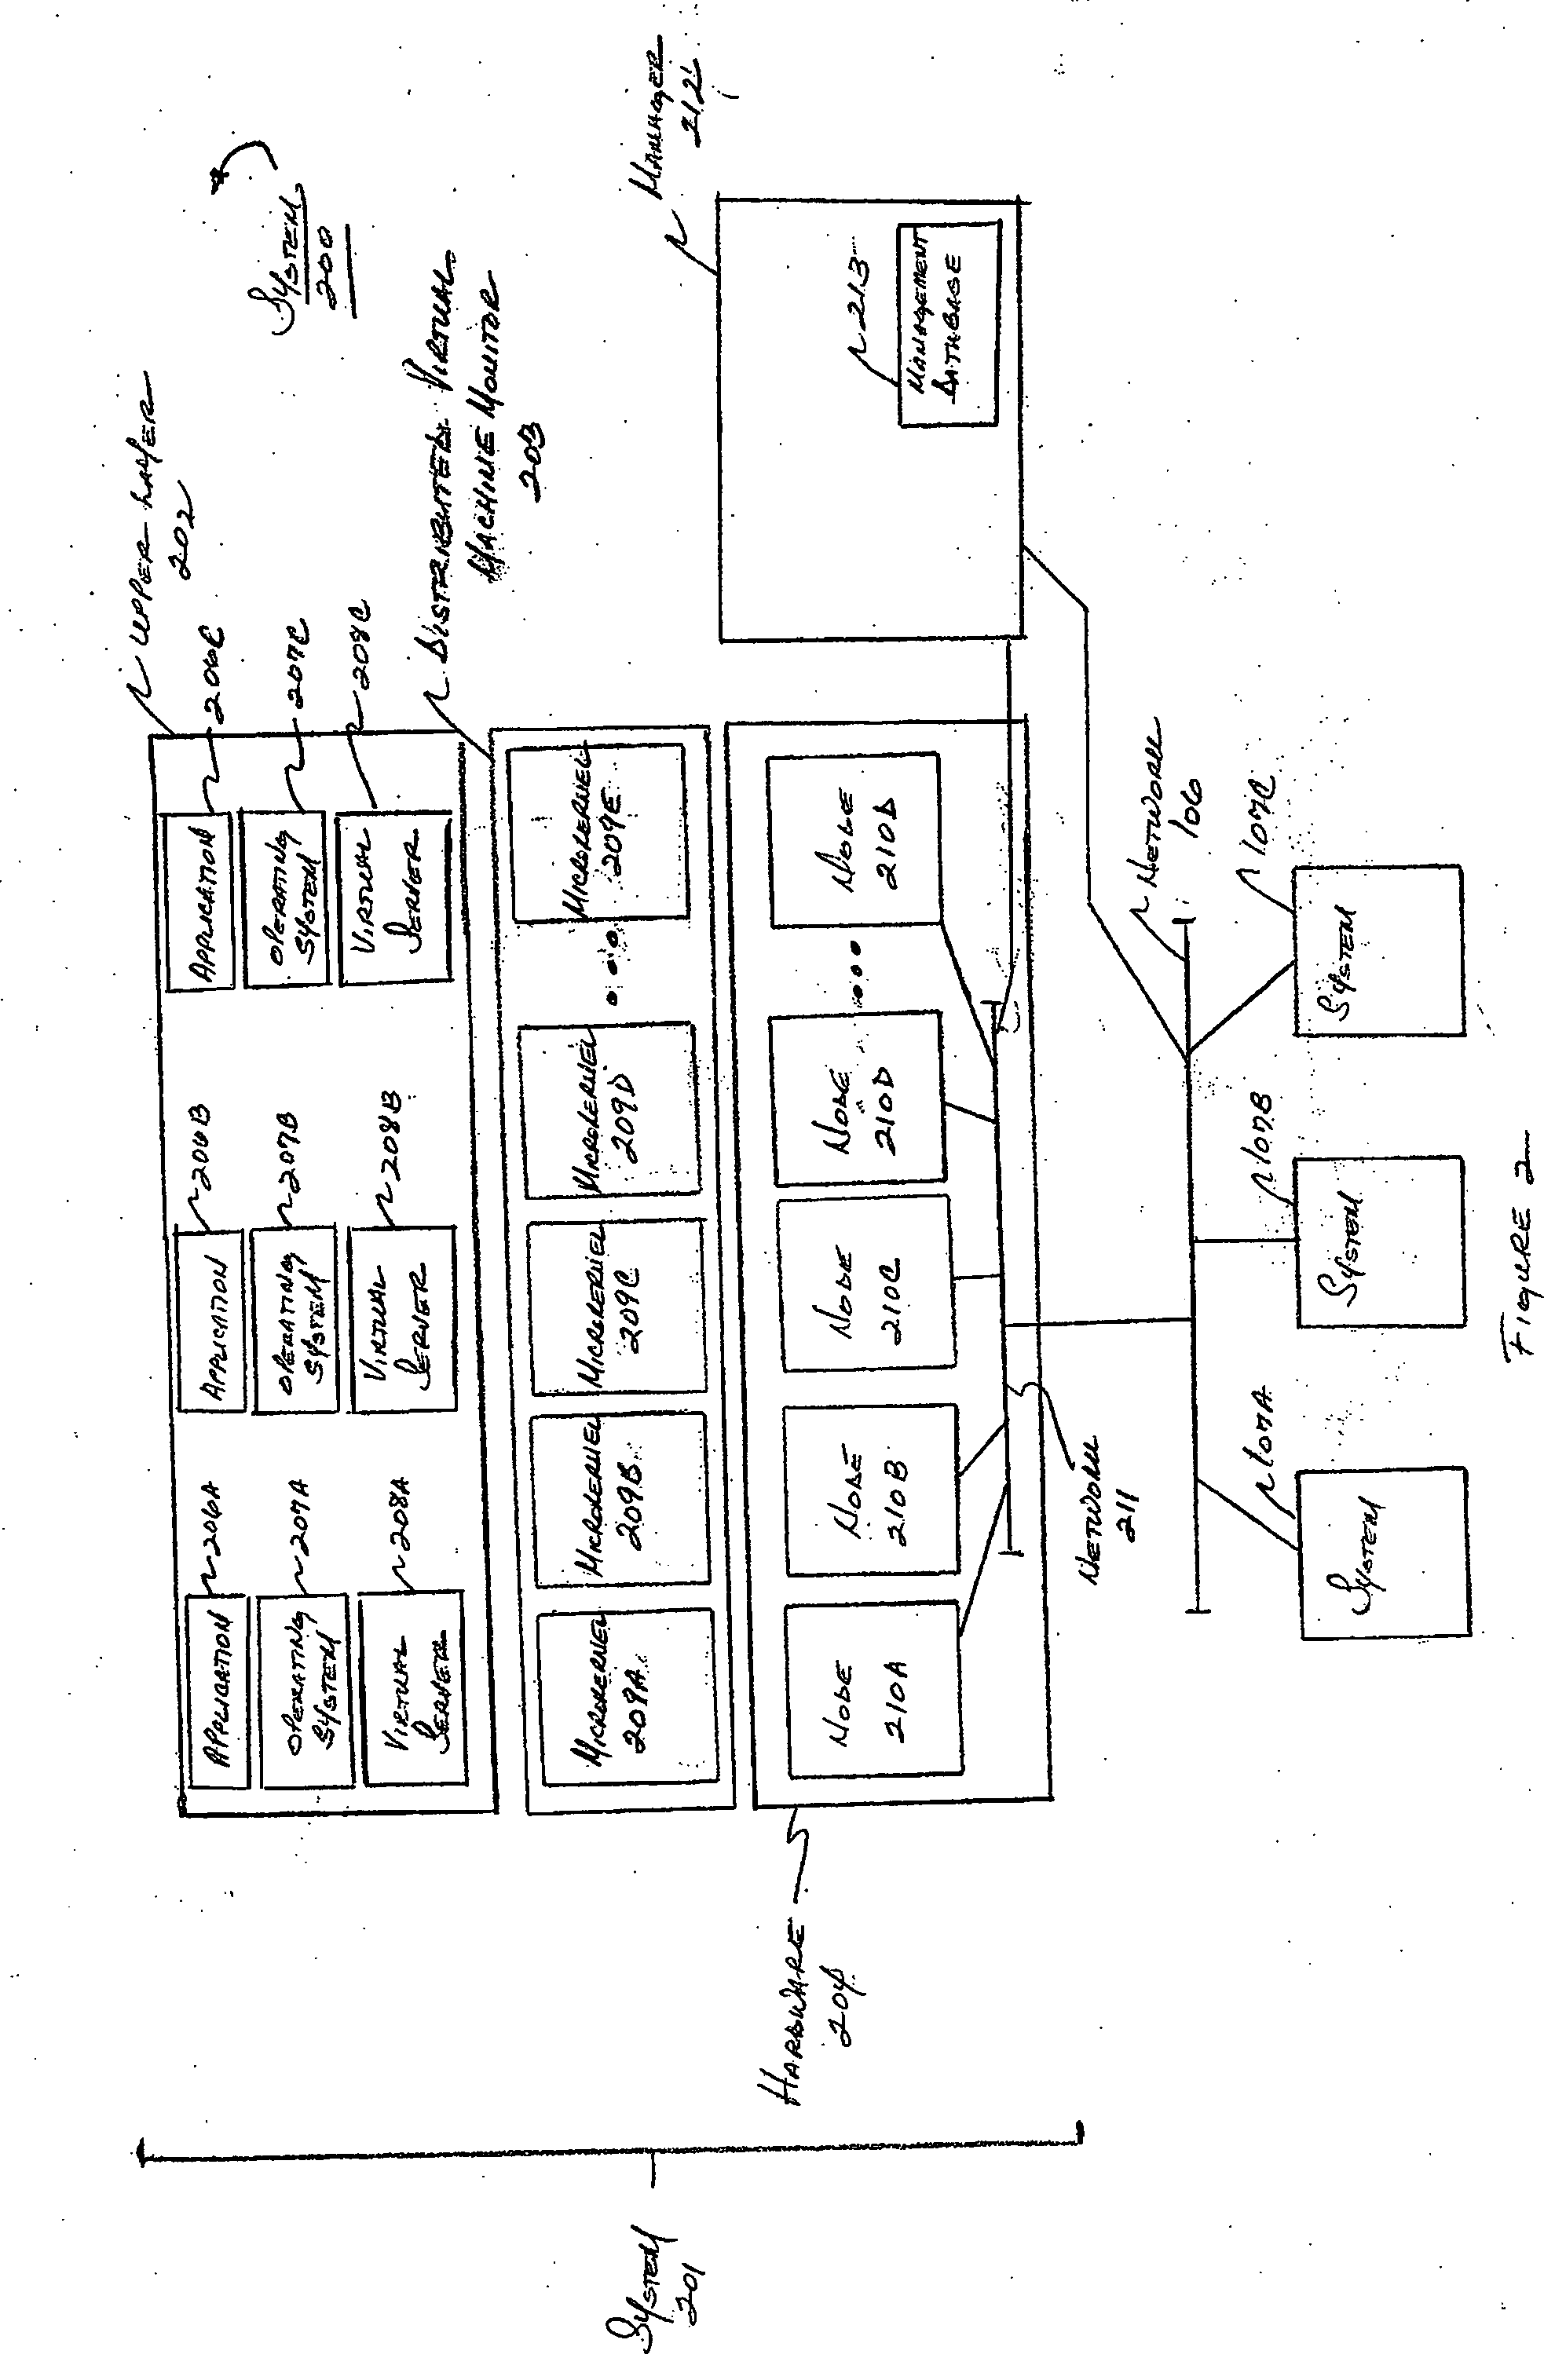 Method and apparatus for providing virtual computing services